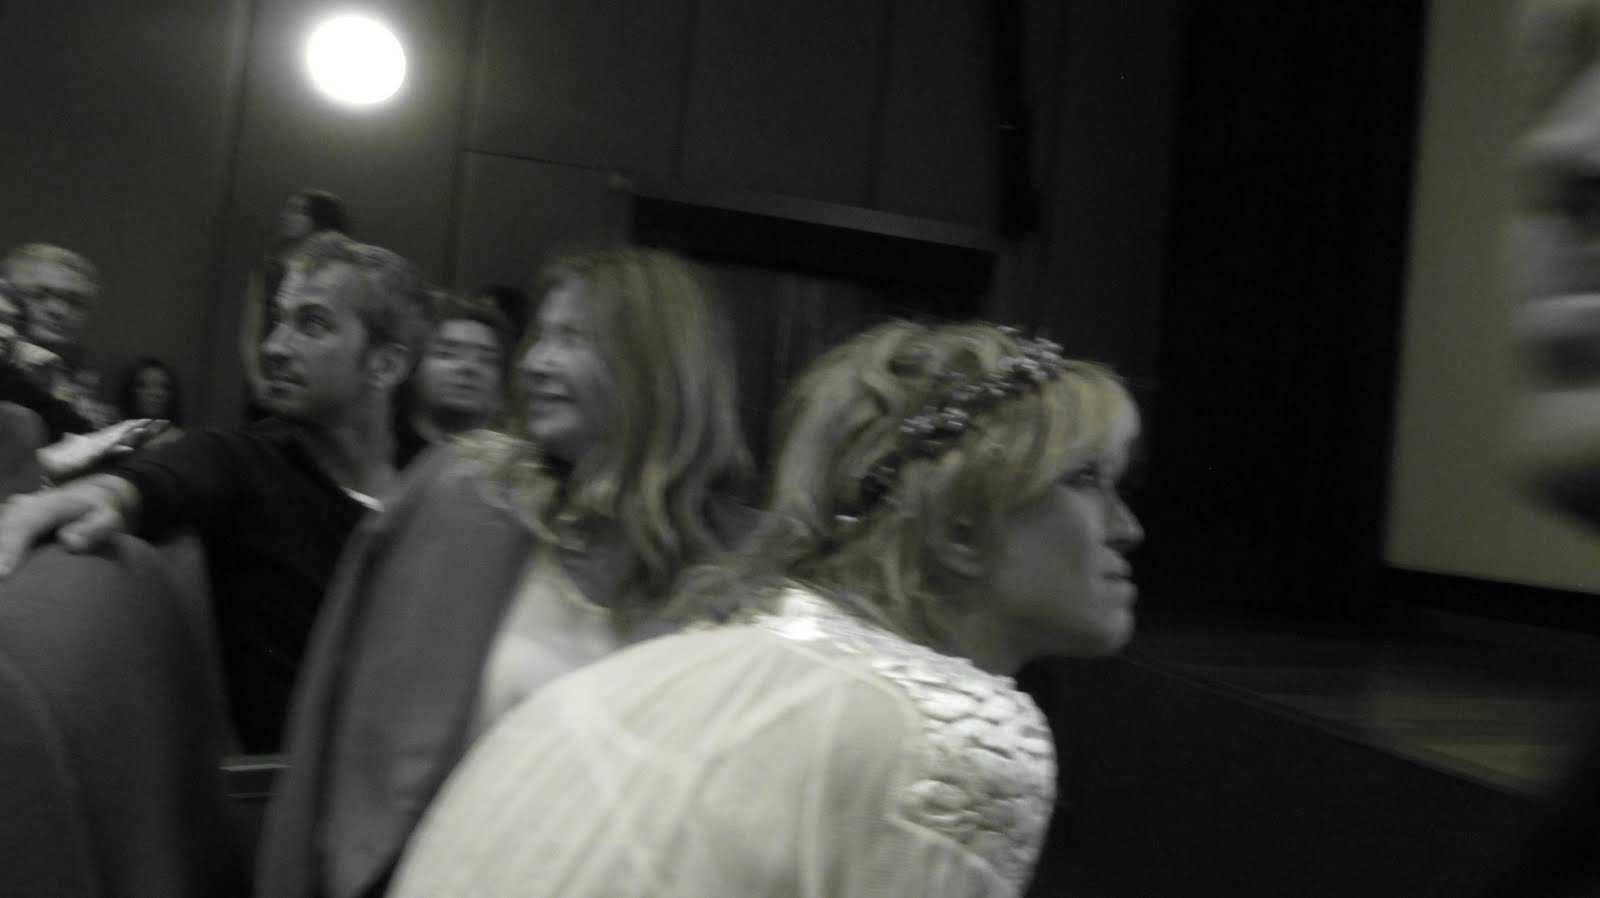 The morning ended with questions from Courtney Love who had flowers in her hair and looked suitably rock and roll.